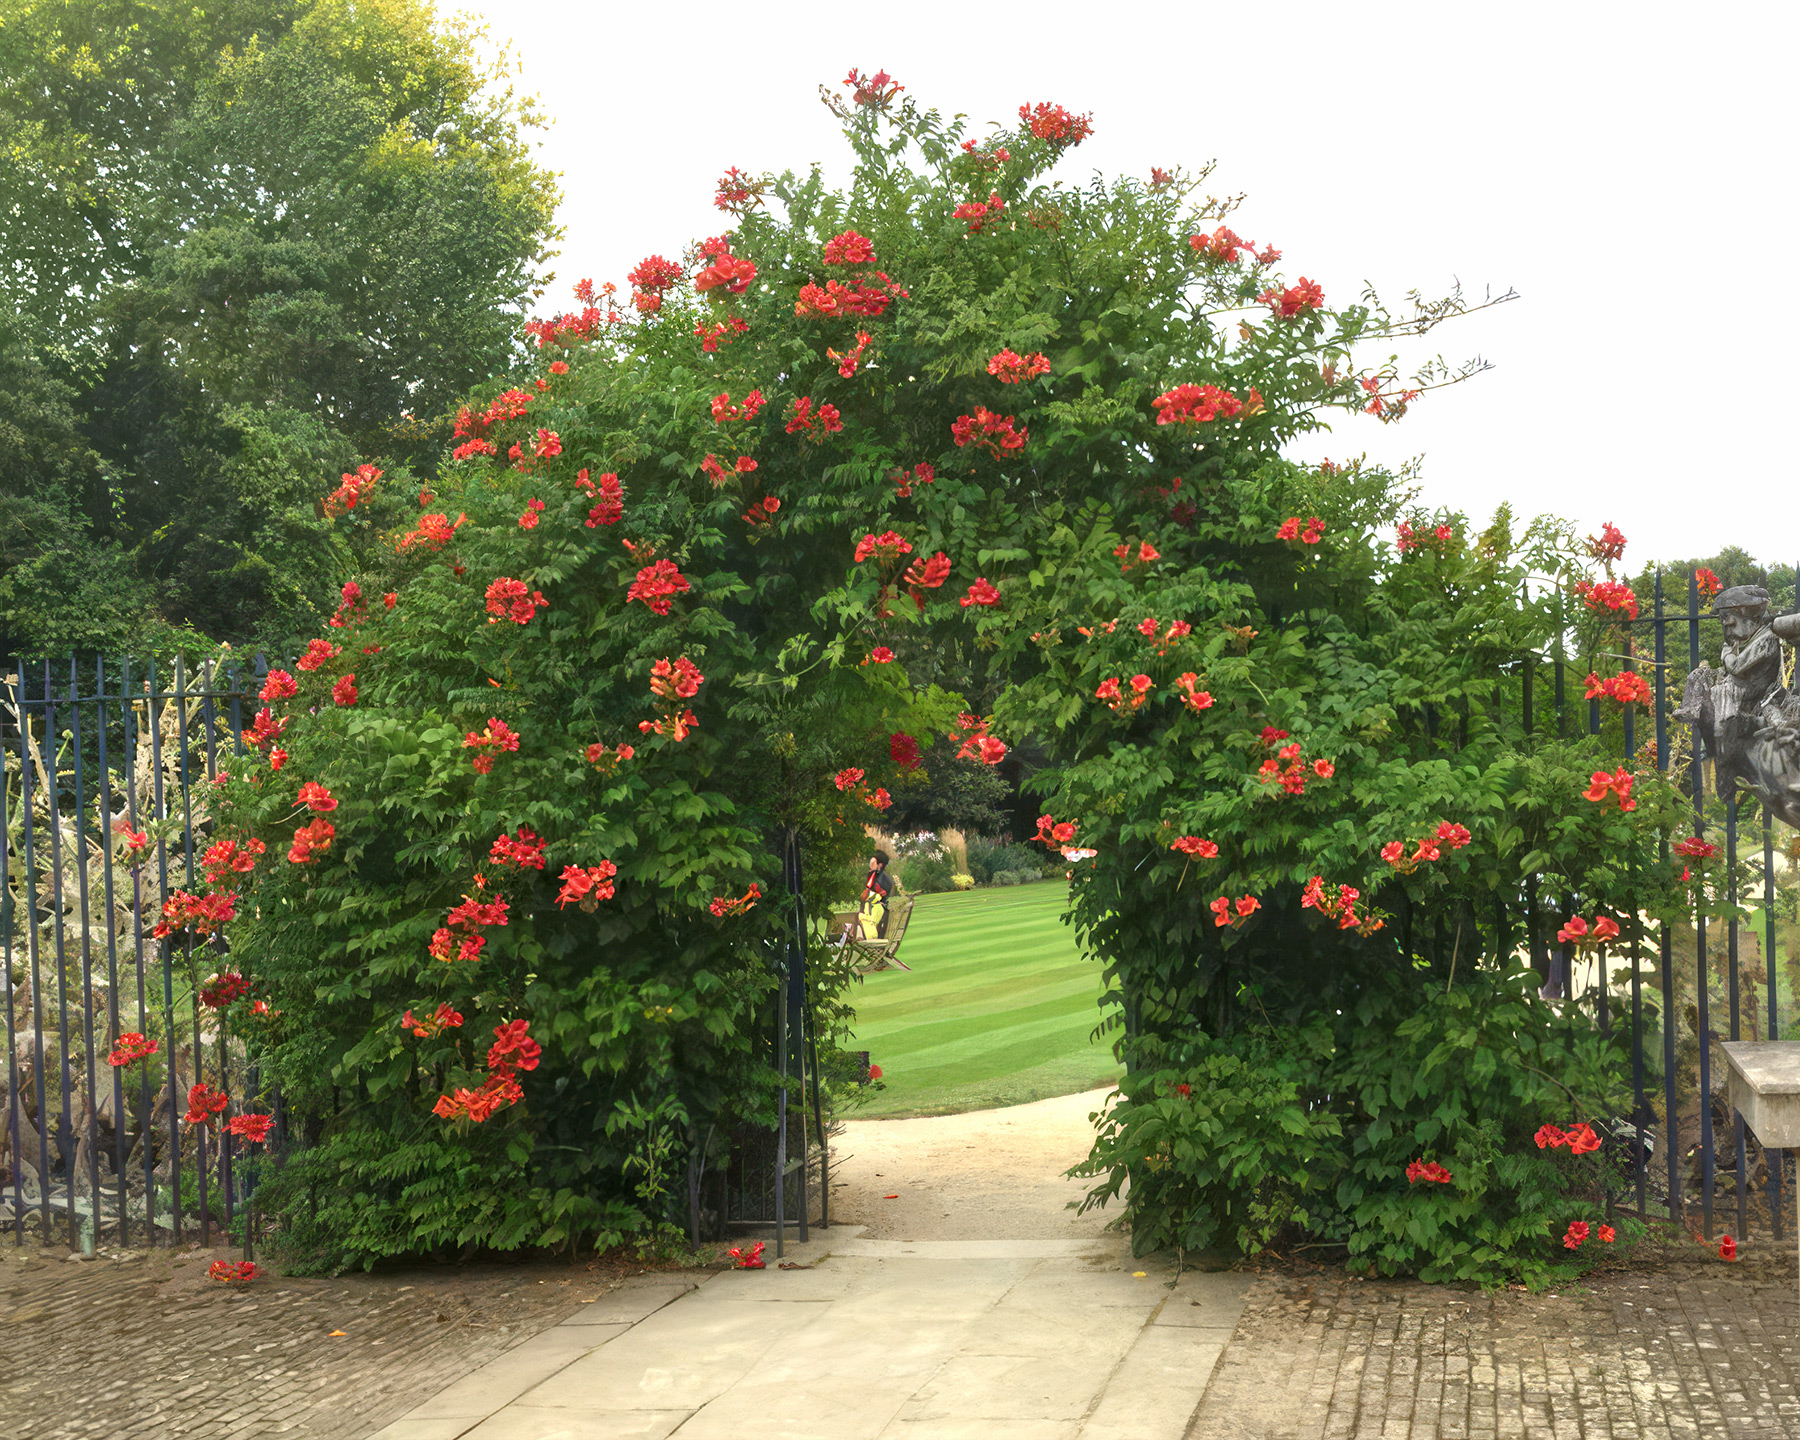 Campsis radicans archway at Oxford University, UK.